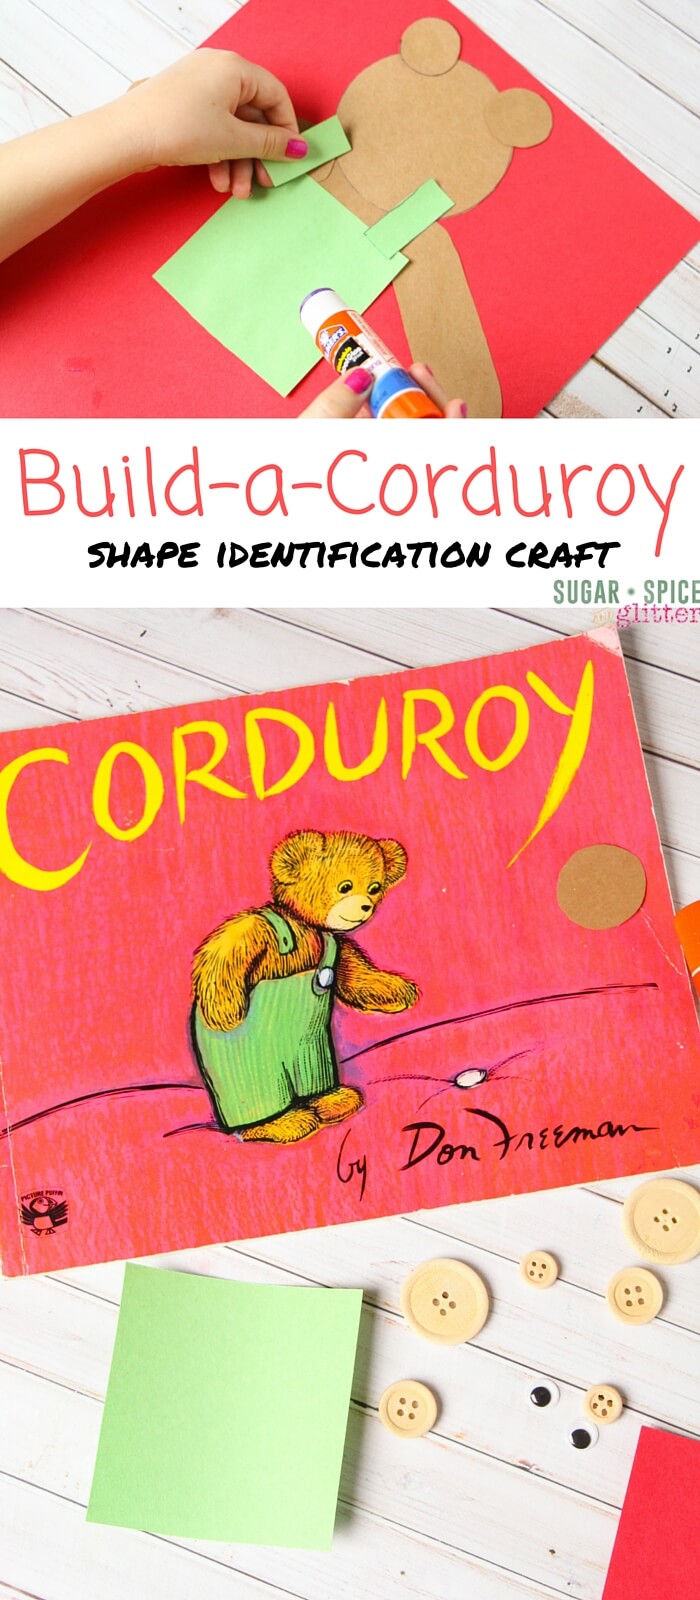 A fun shape identification craft to try after reading Corduroy - this easy book craft for kids is great for mixed age groups or as a busy bag activity.